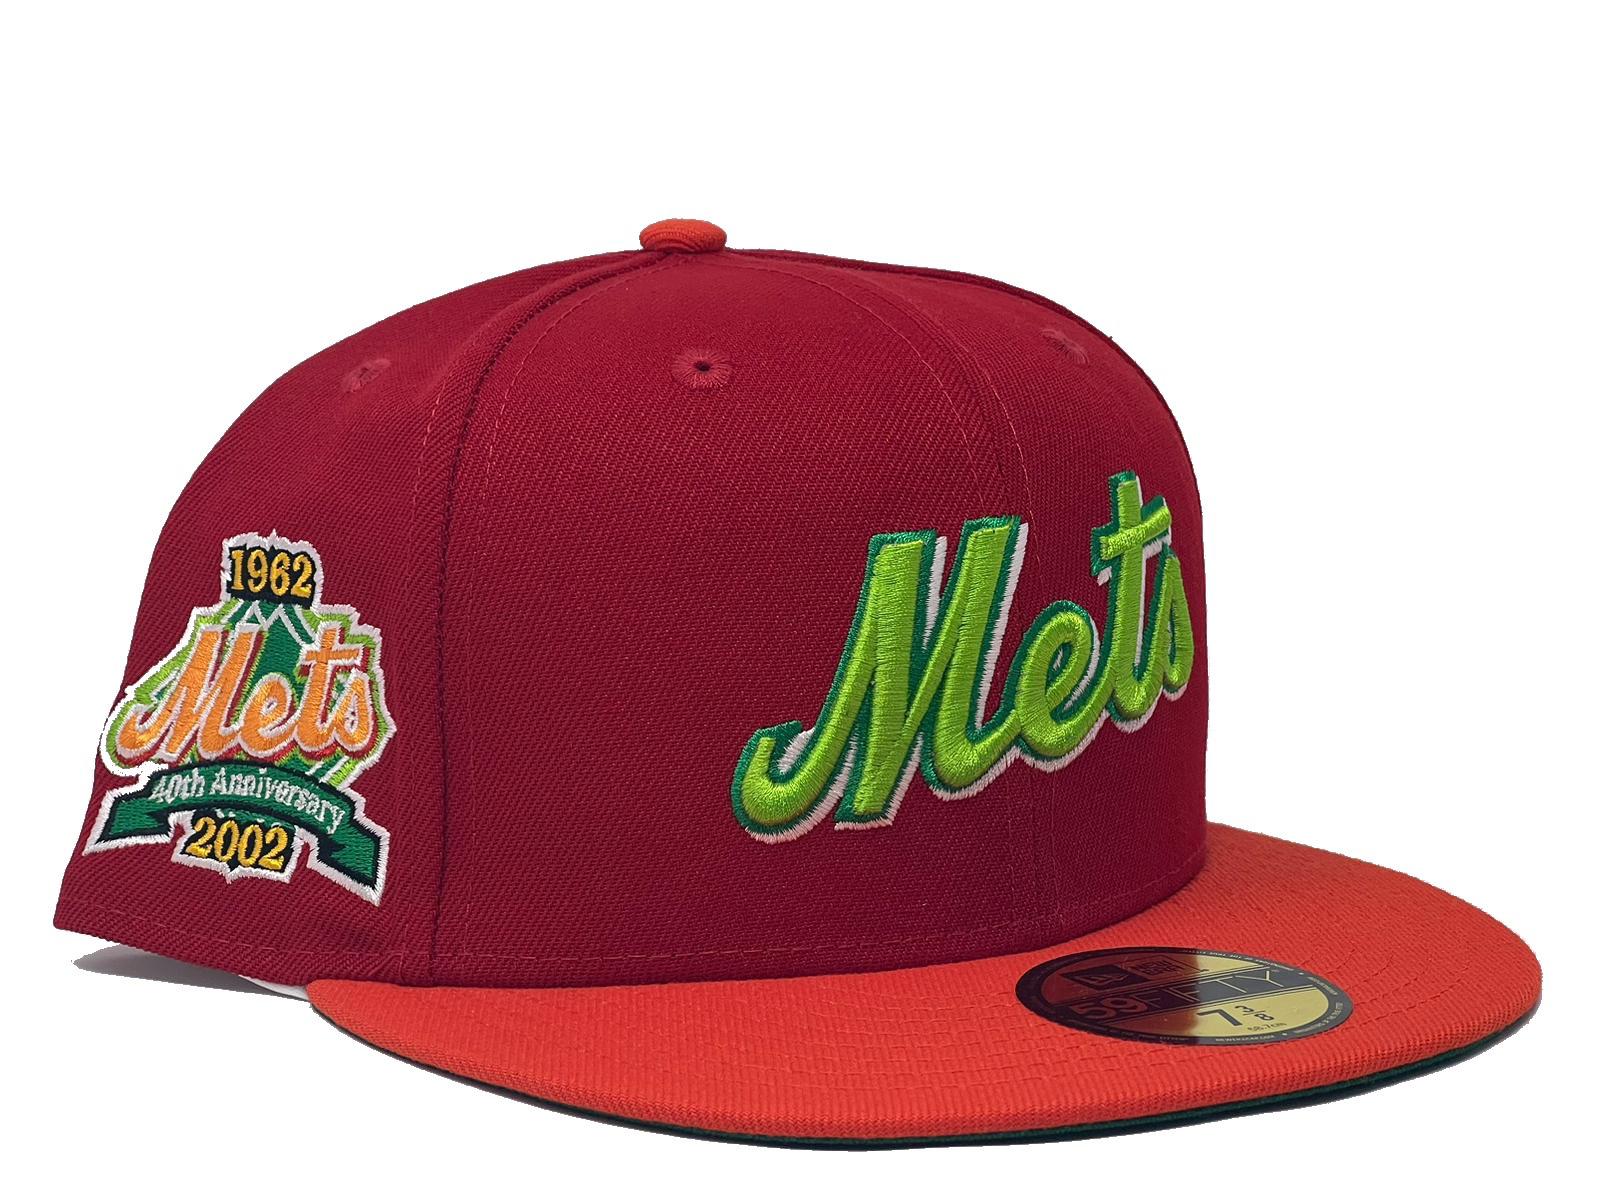 NEW YORK METS 40TH ANNIVERSARY GAMECUBE COLLECTION GREEN BRIM